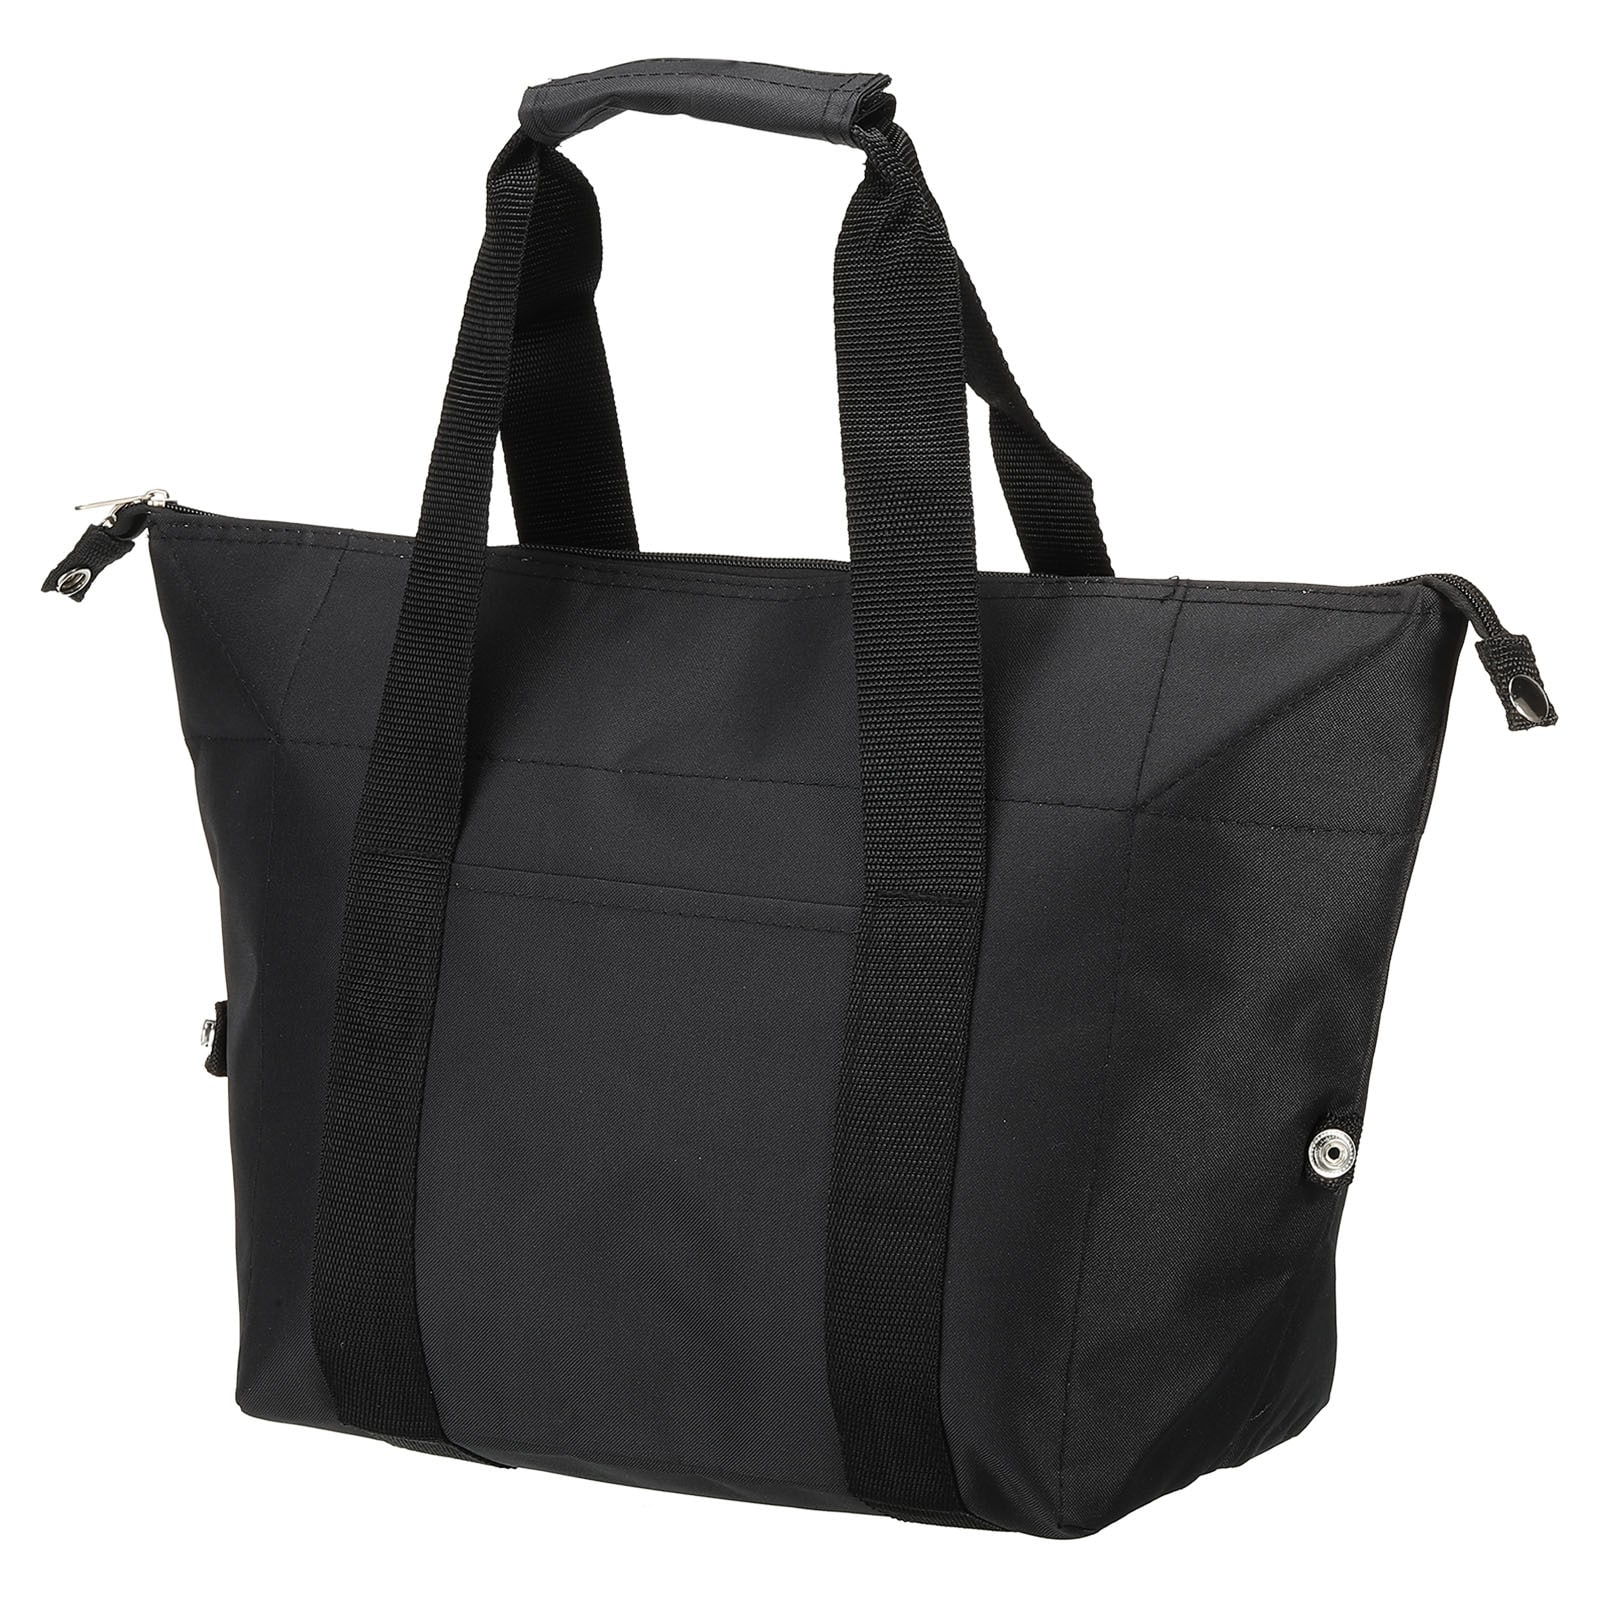 Insulated Lunch Bag, Lunch Tote Bag Container, 11.42"x6.69"x11.81"